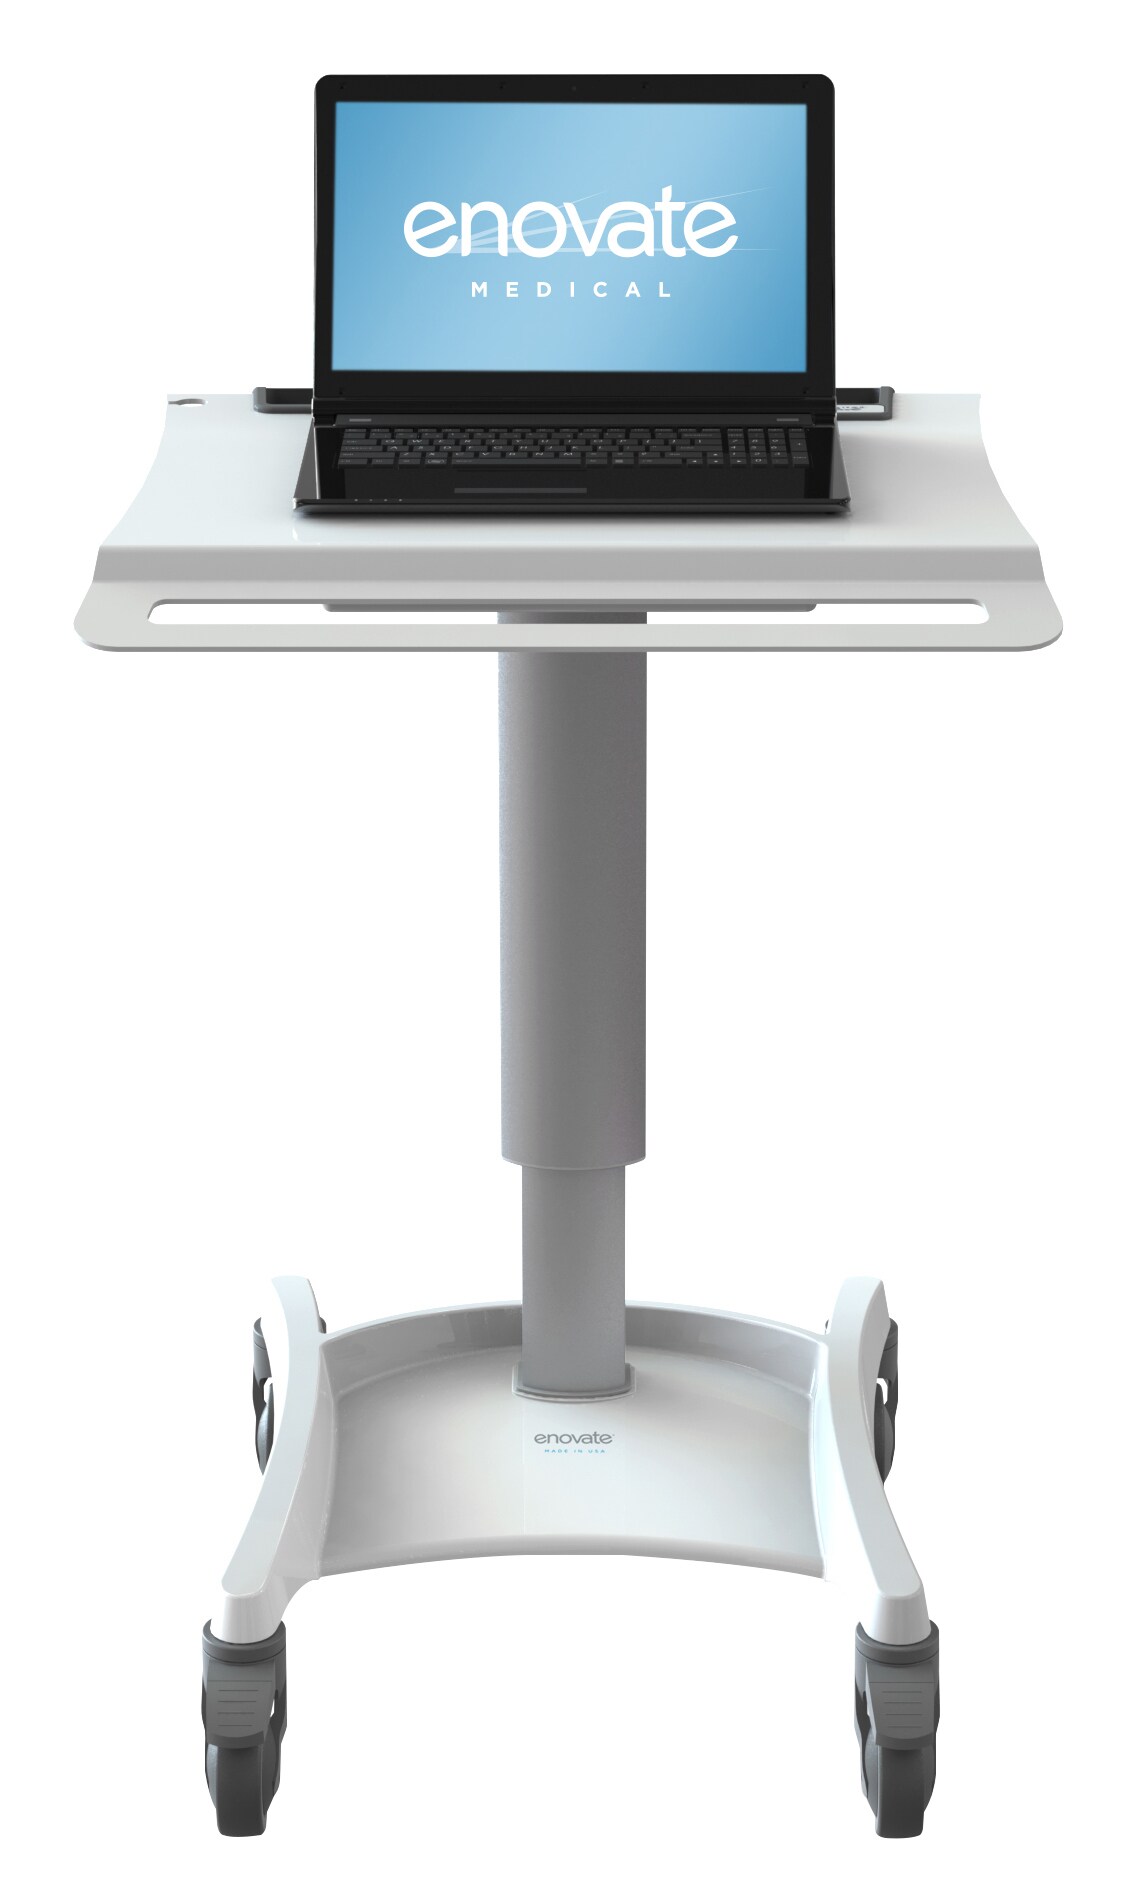 Enovate Medical DUO cart - for notebook